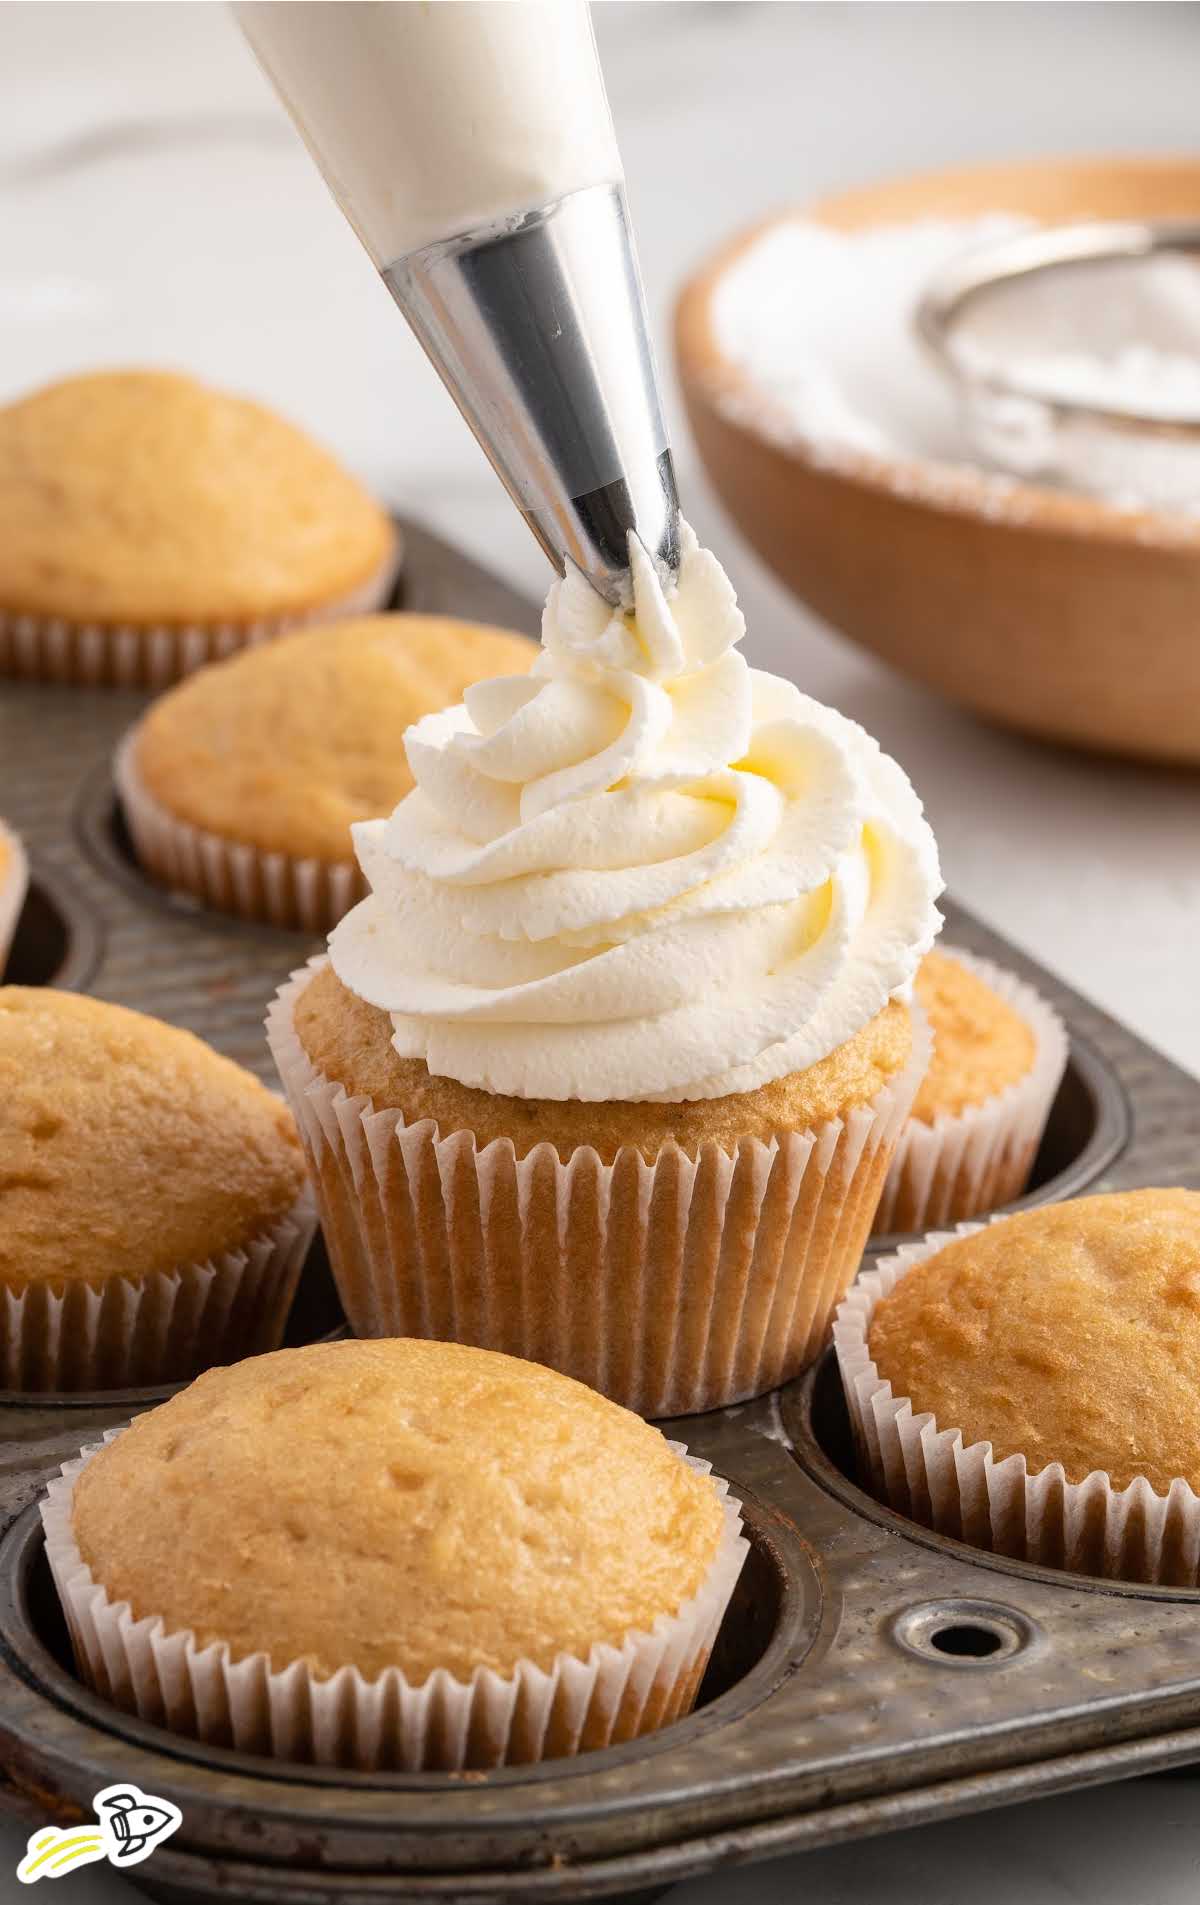 a close up shot of Mascarpone Frosting on a cupcake